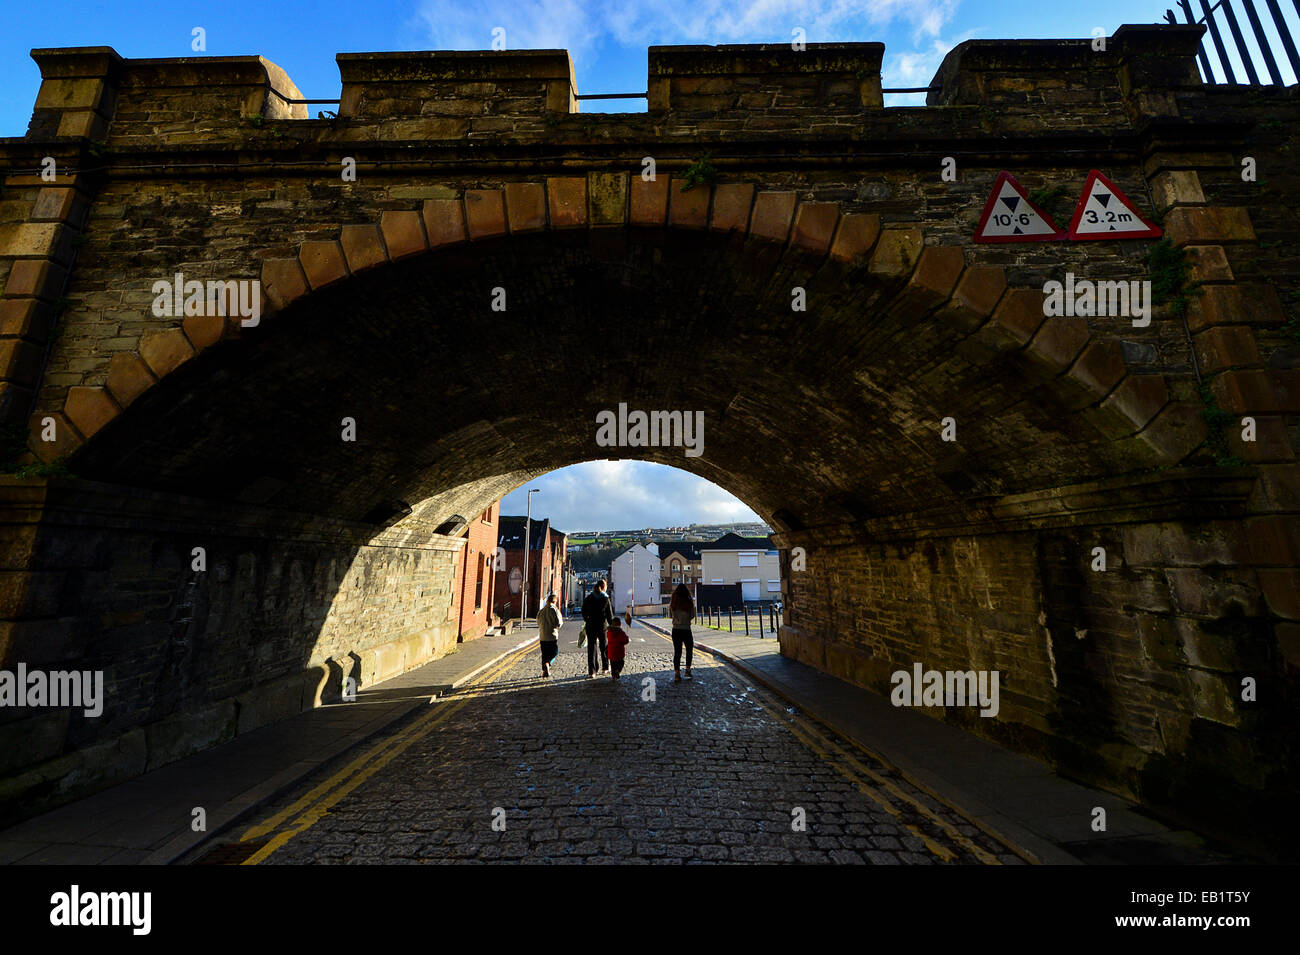 New Gate, Derry Walls, Derry, Londonderry. Photo: George Sweeney/Alamy Stock Photo